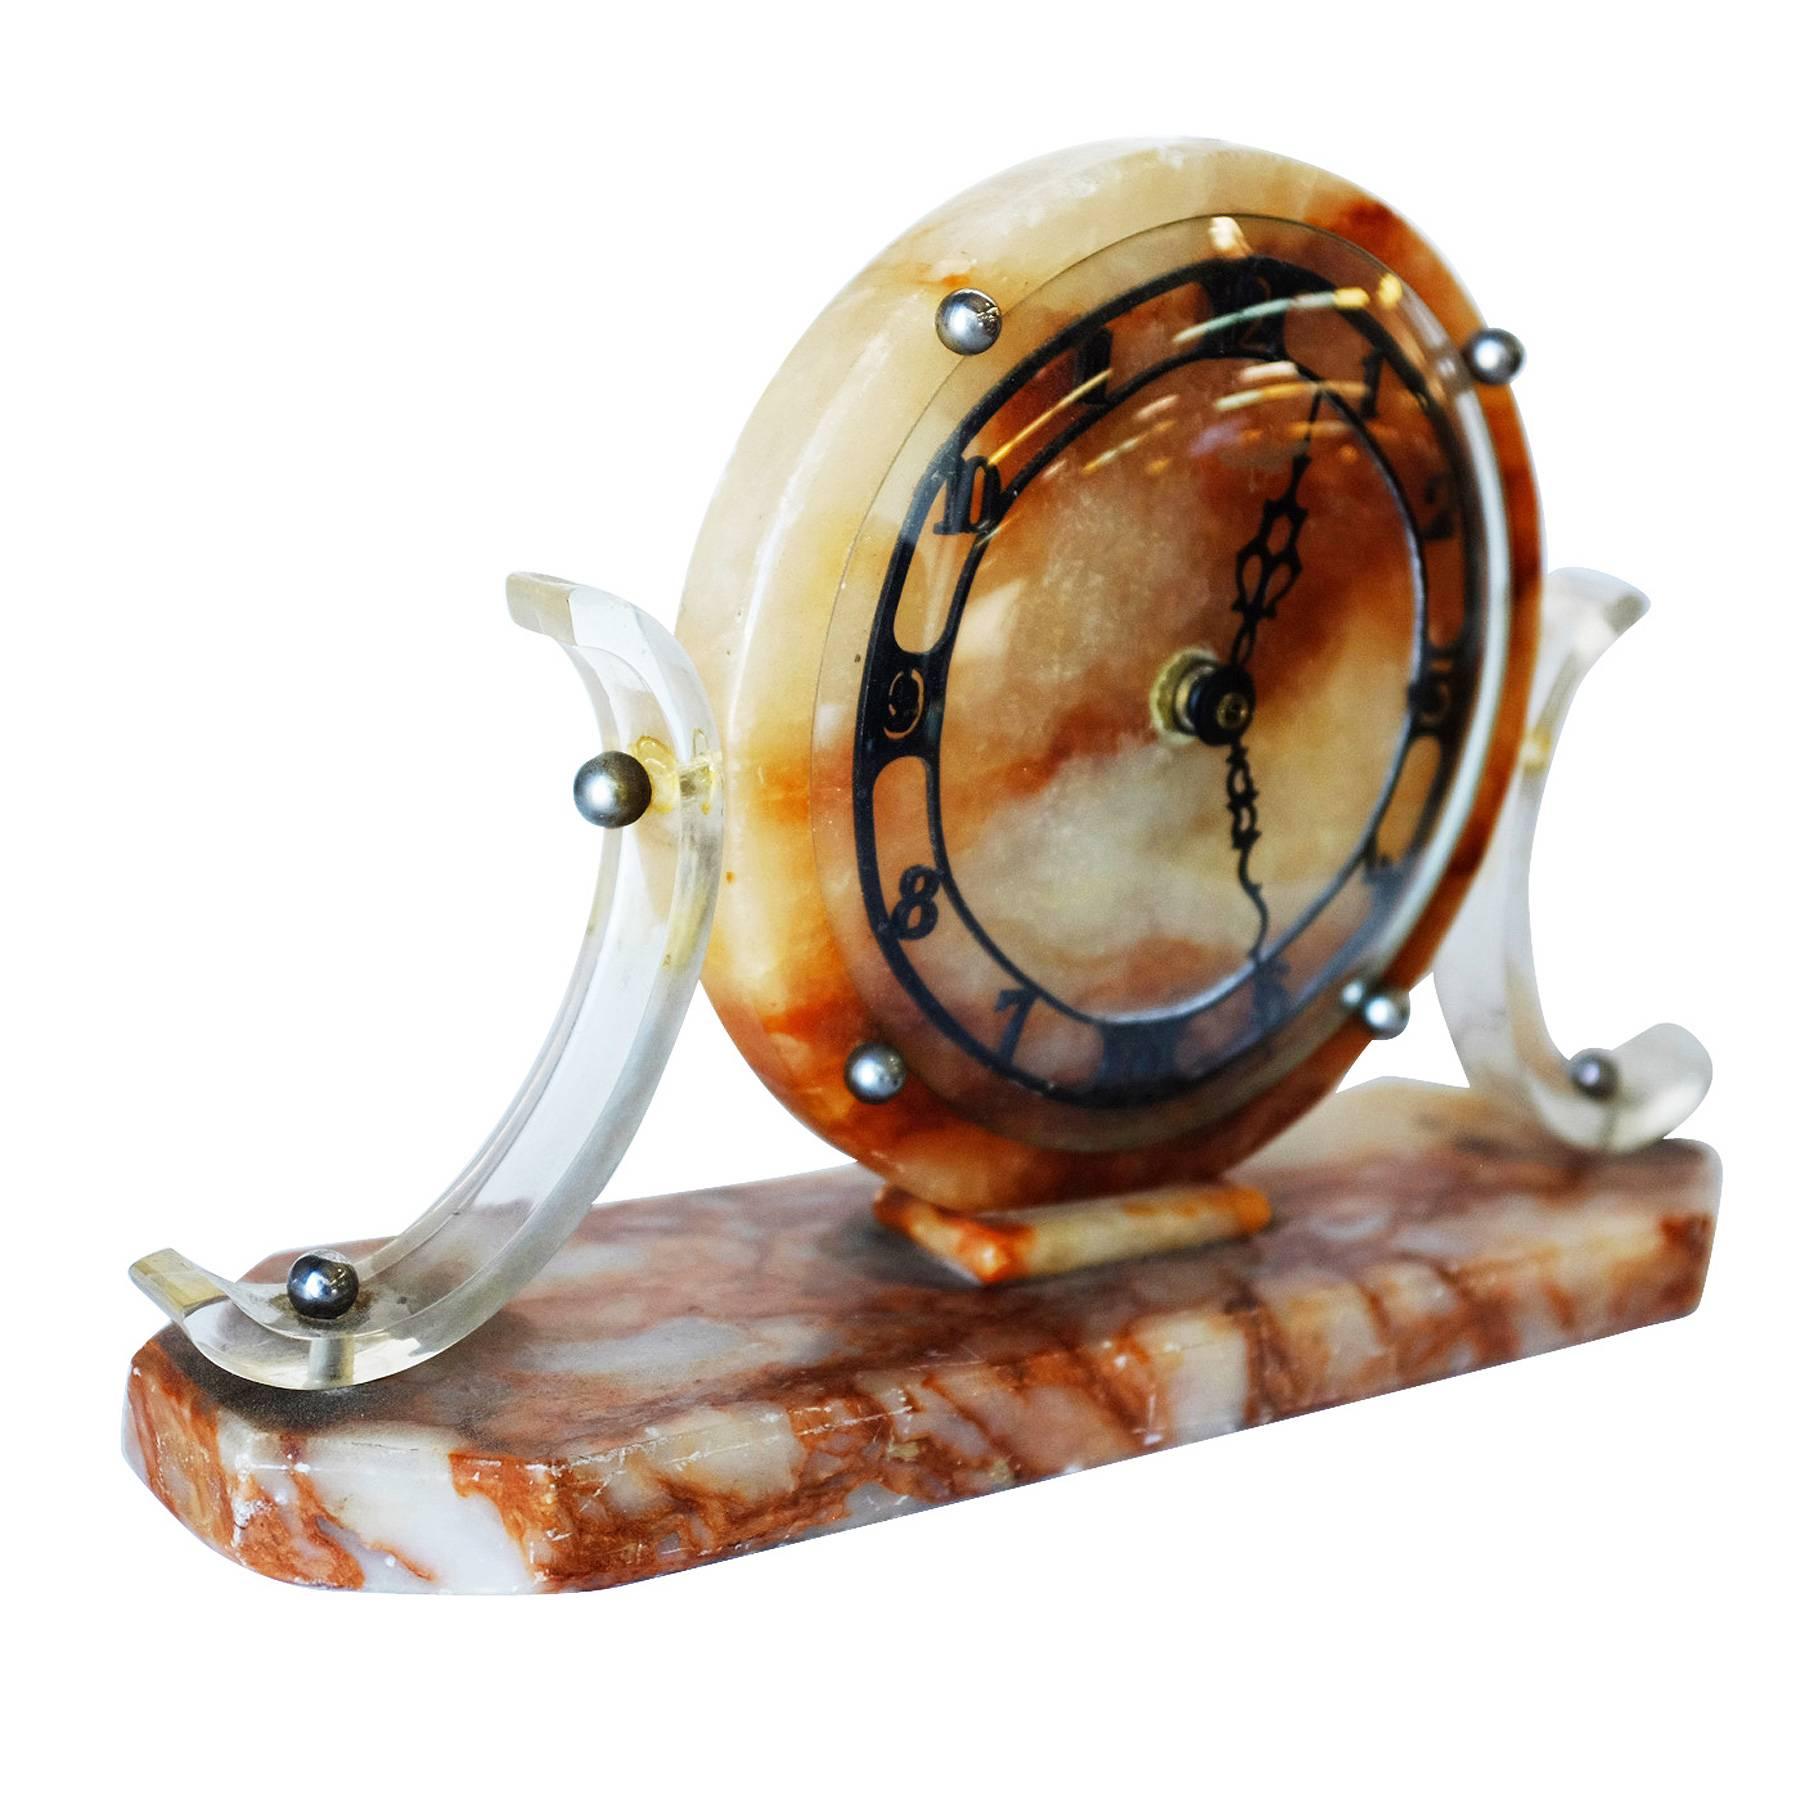 High style marble modernist mantel clock with unique acrylic accents and new quartz movement, circa 1950.